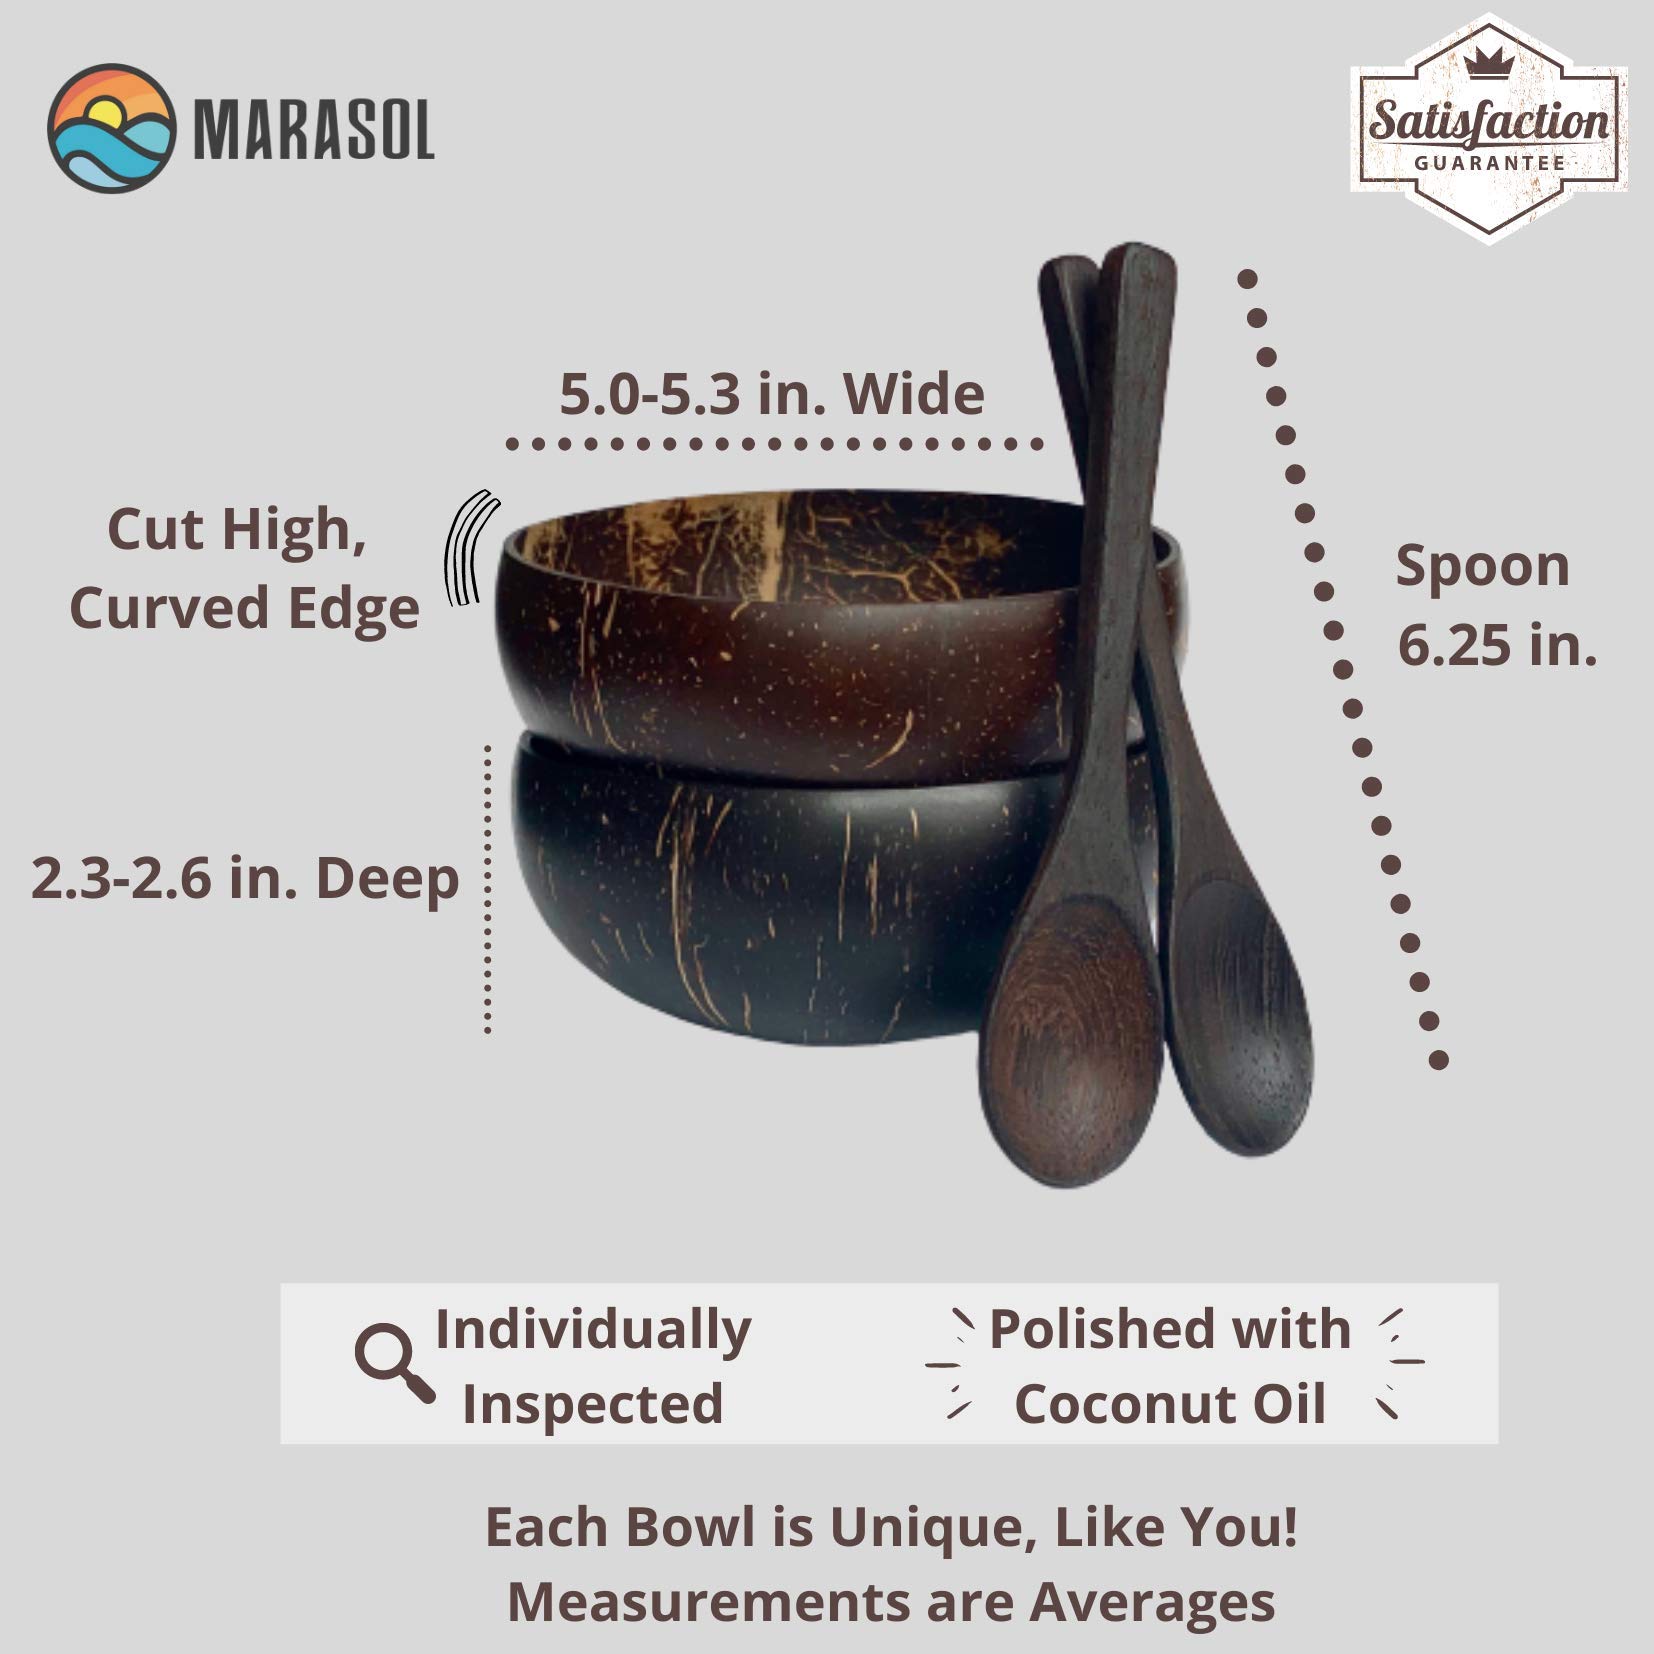 Marasol Coconut Bowls with Spoons 2x All Natural, Vegan | Smoothie Bowls, Acai | Gift Ready Packaging | Eco Friendly, Zero Waste | Handcrafted